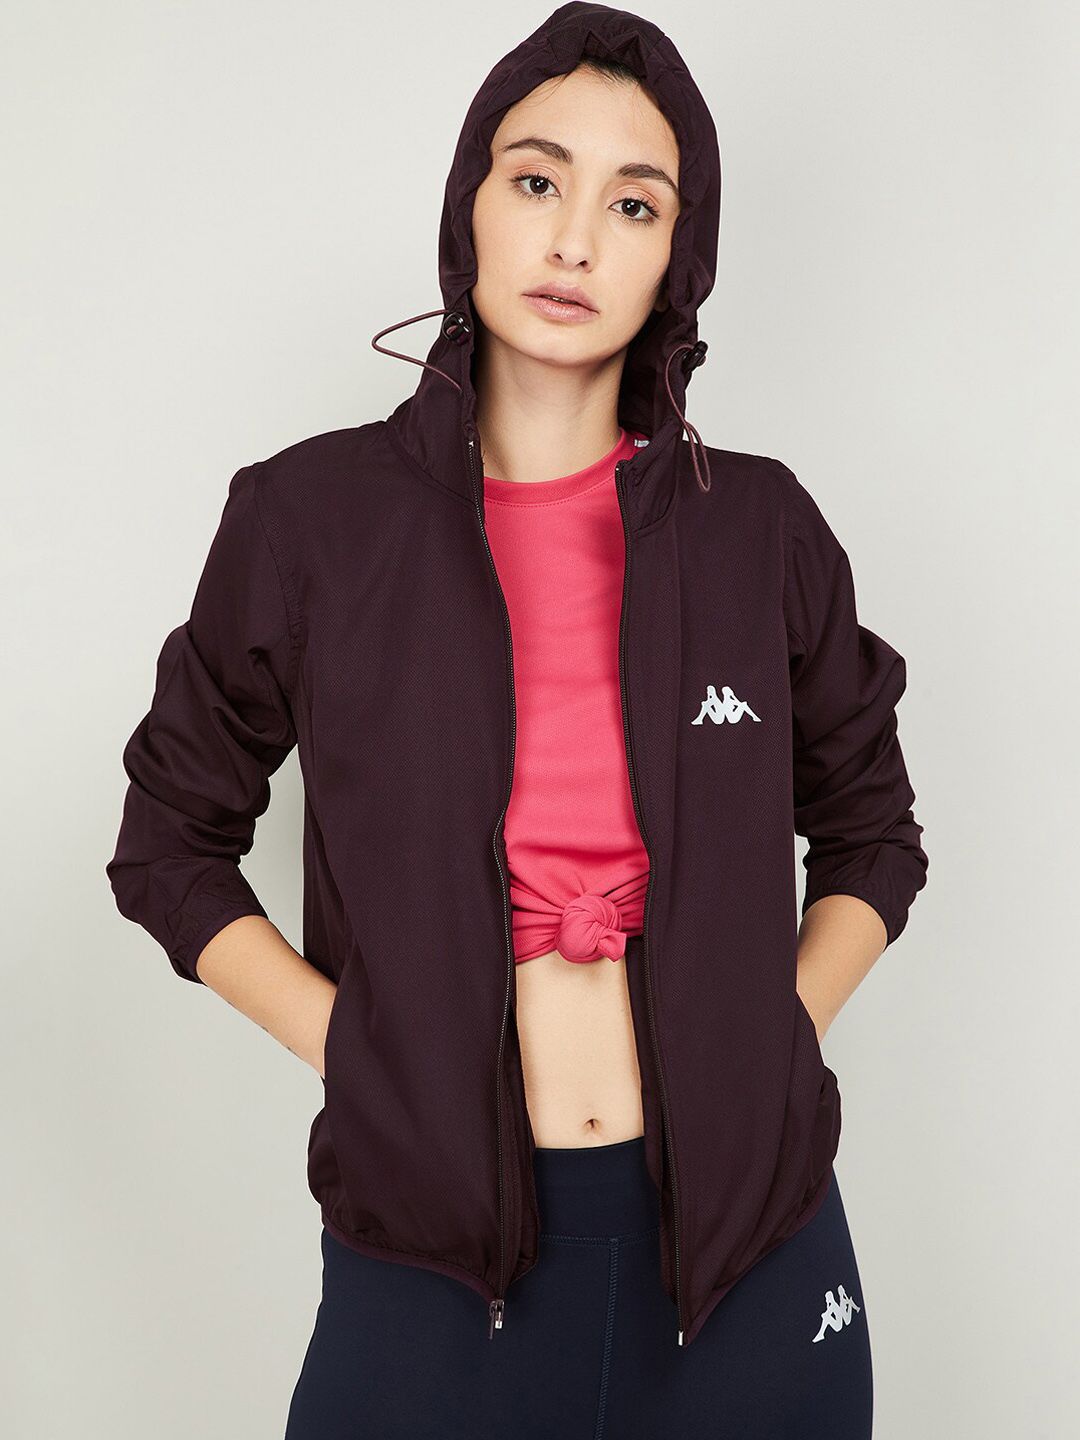 Kappa Women Burgundy Floral Sporty Jacket Price in India